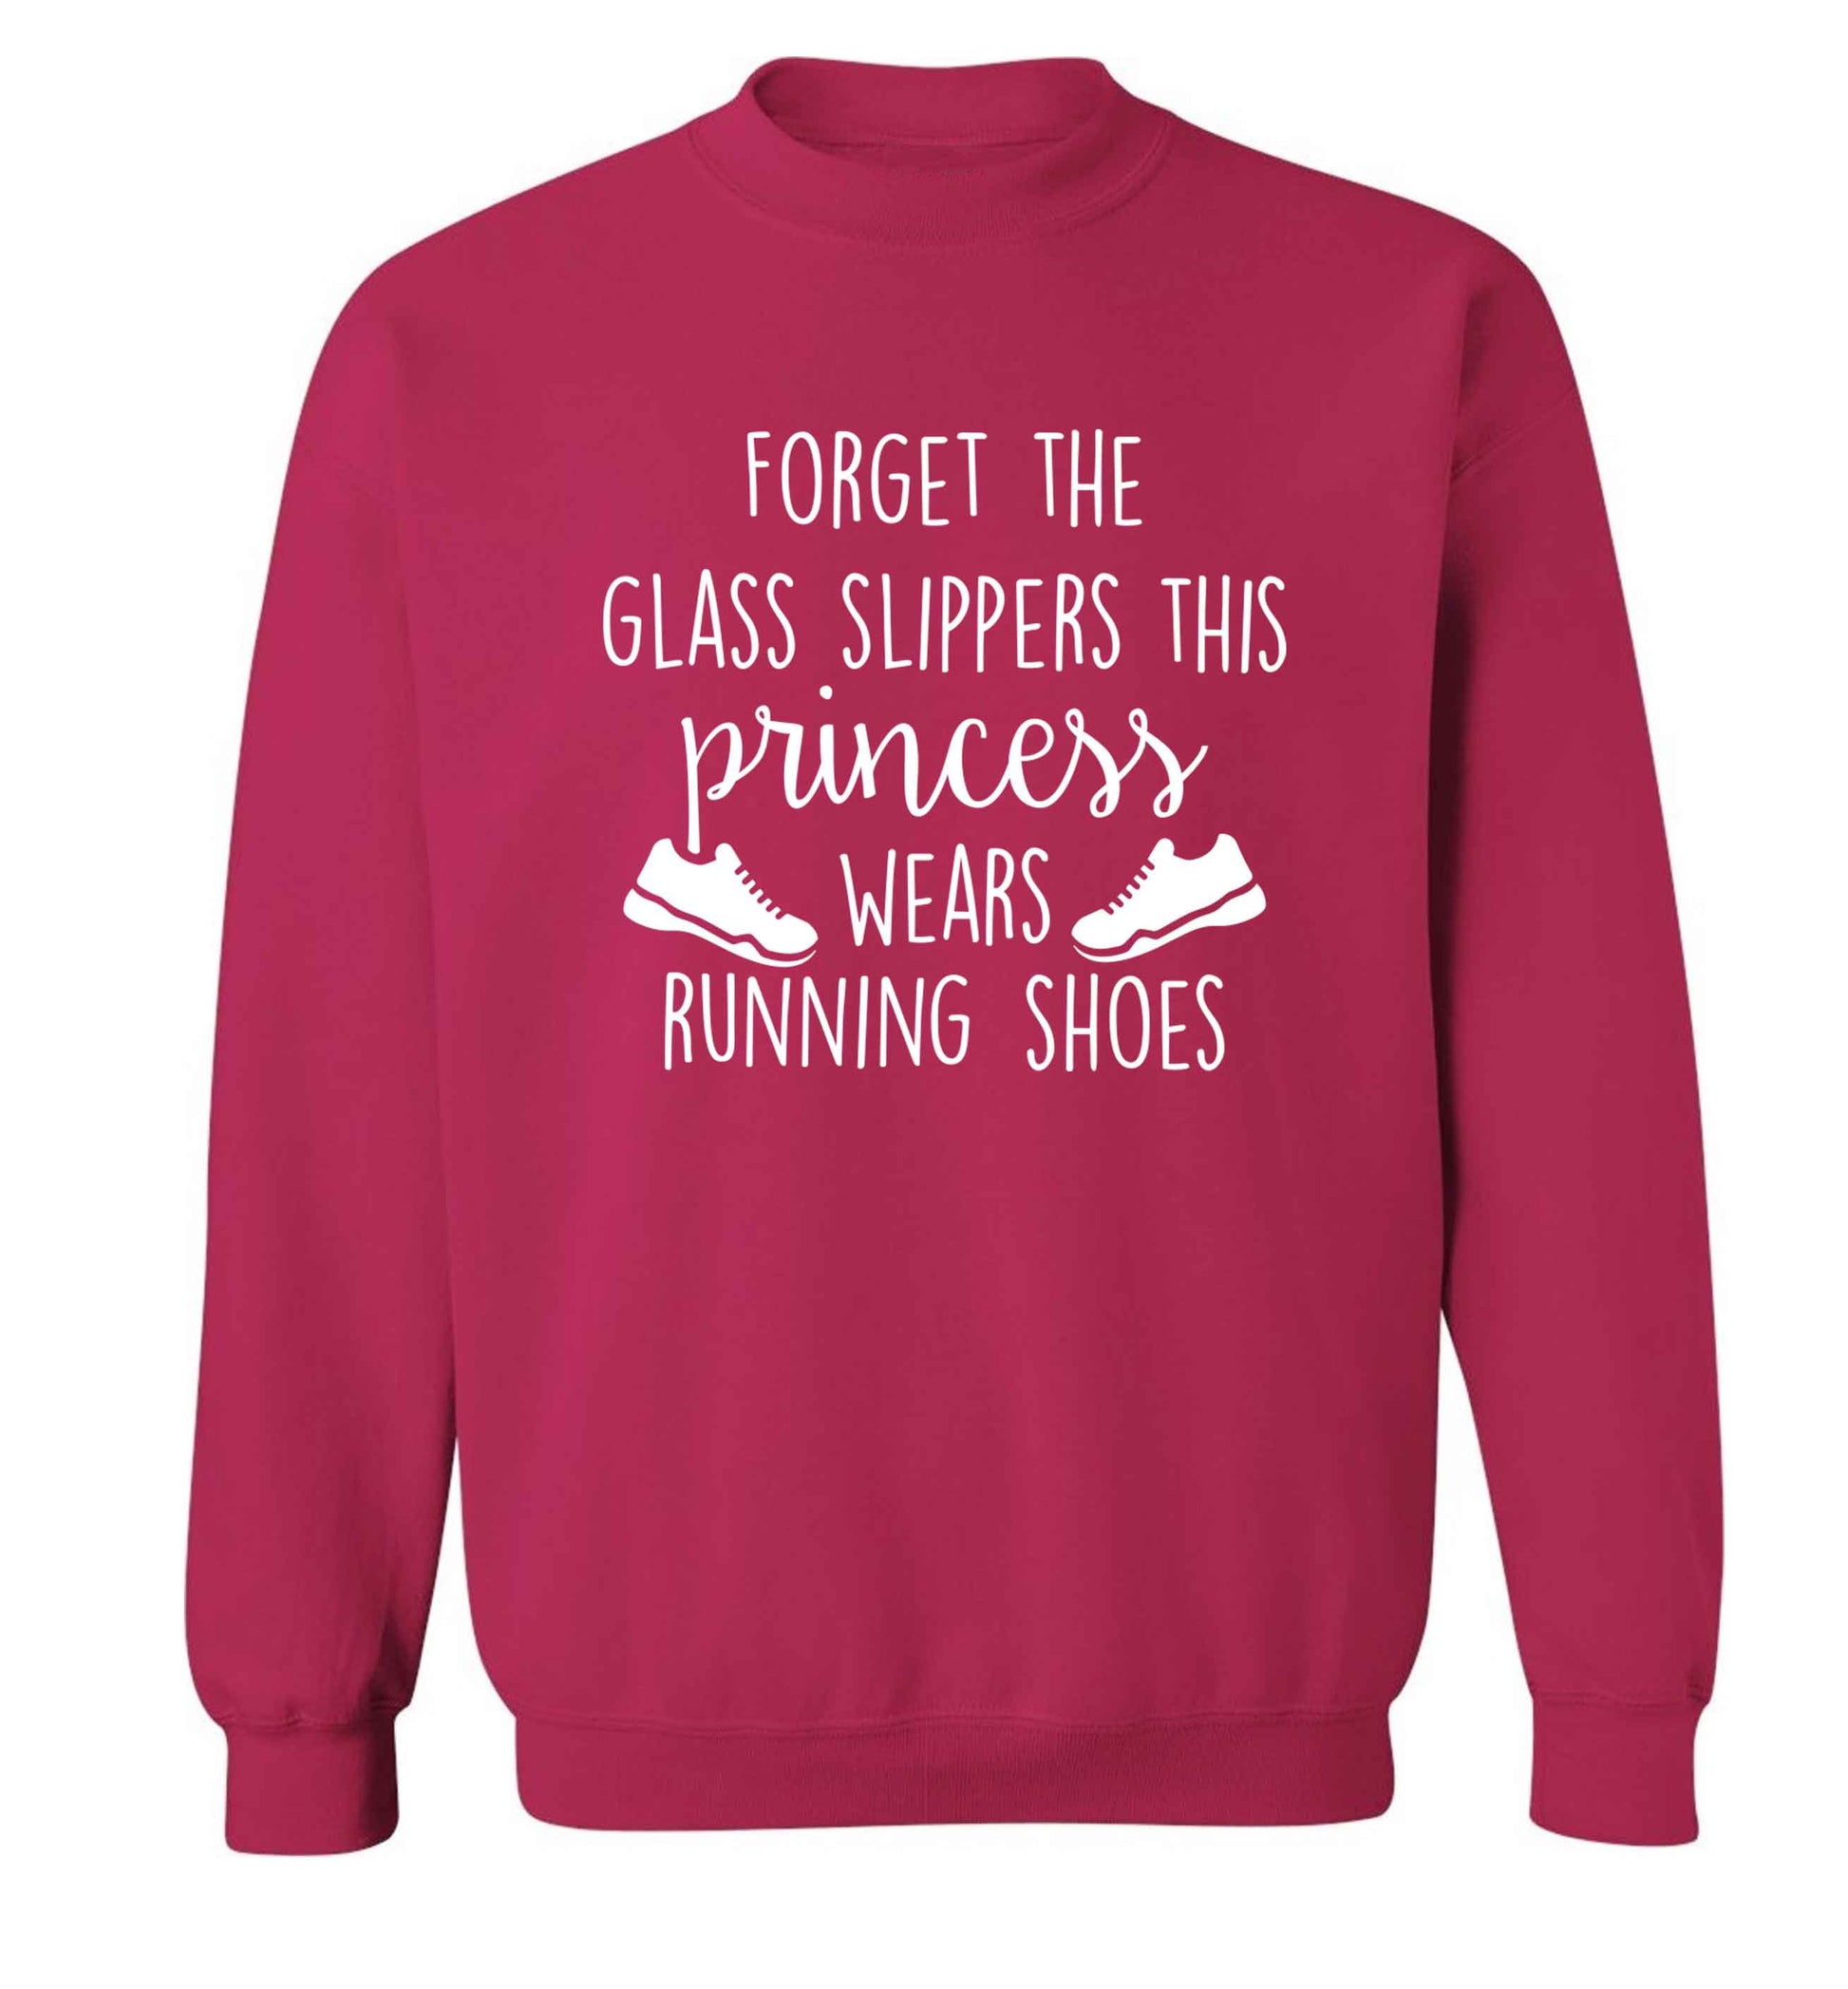 Forget the glass slippers this princess wears running shoes adult's unisex pink sweater 2XL